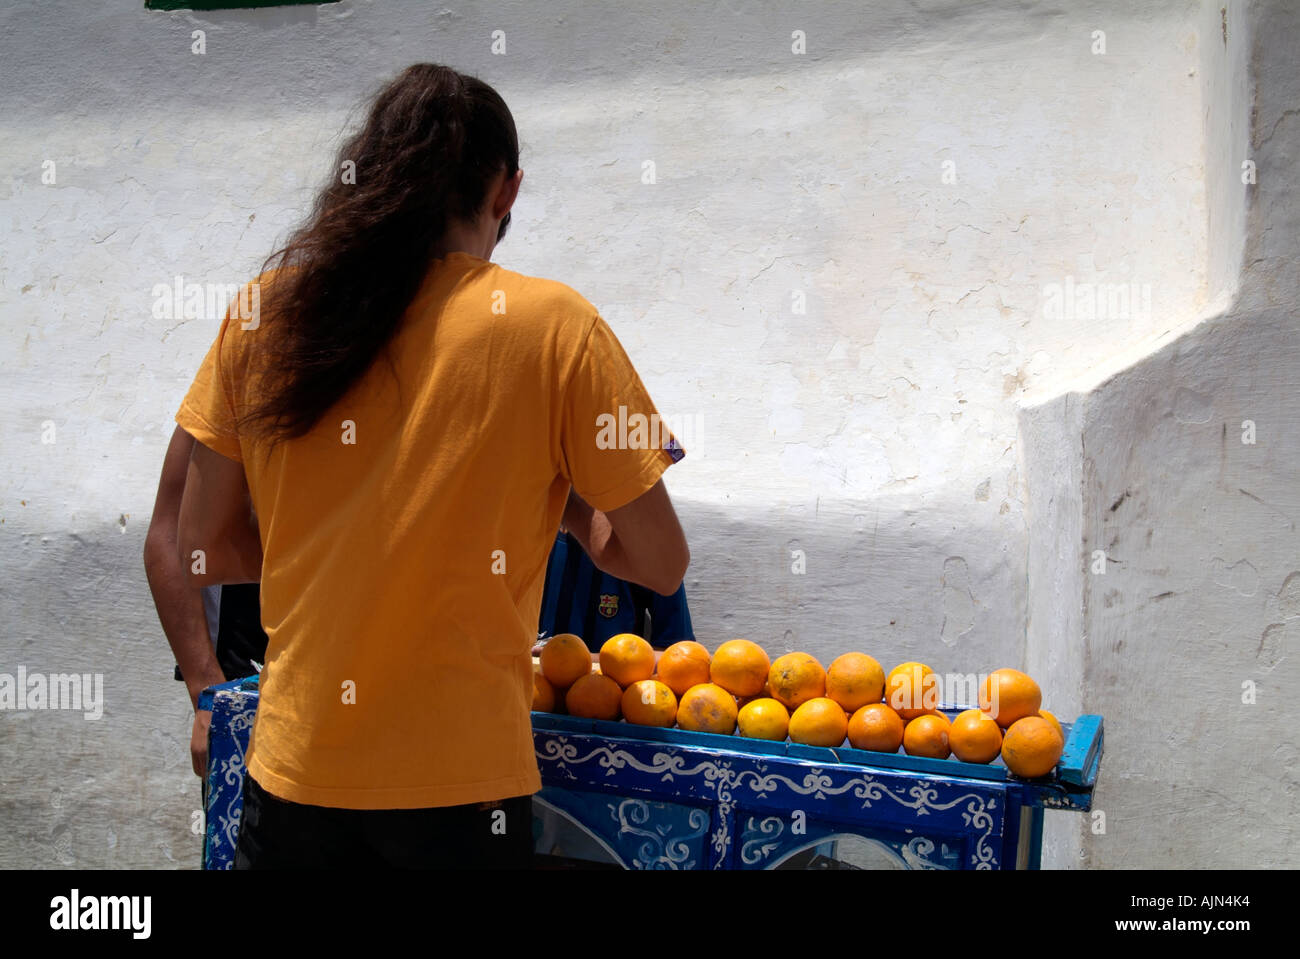 Man with his back to the camera is selling freshly squeezed orange juice from his small blue cart which is piled with oranges. Stock Photo